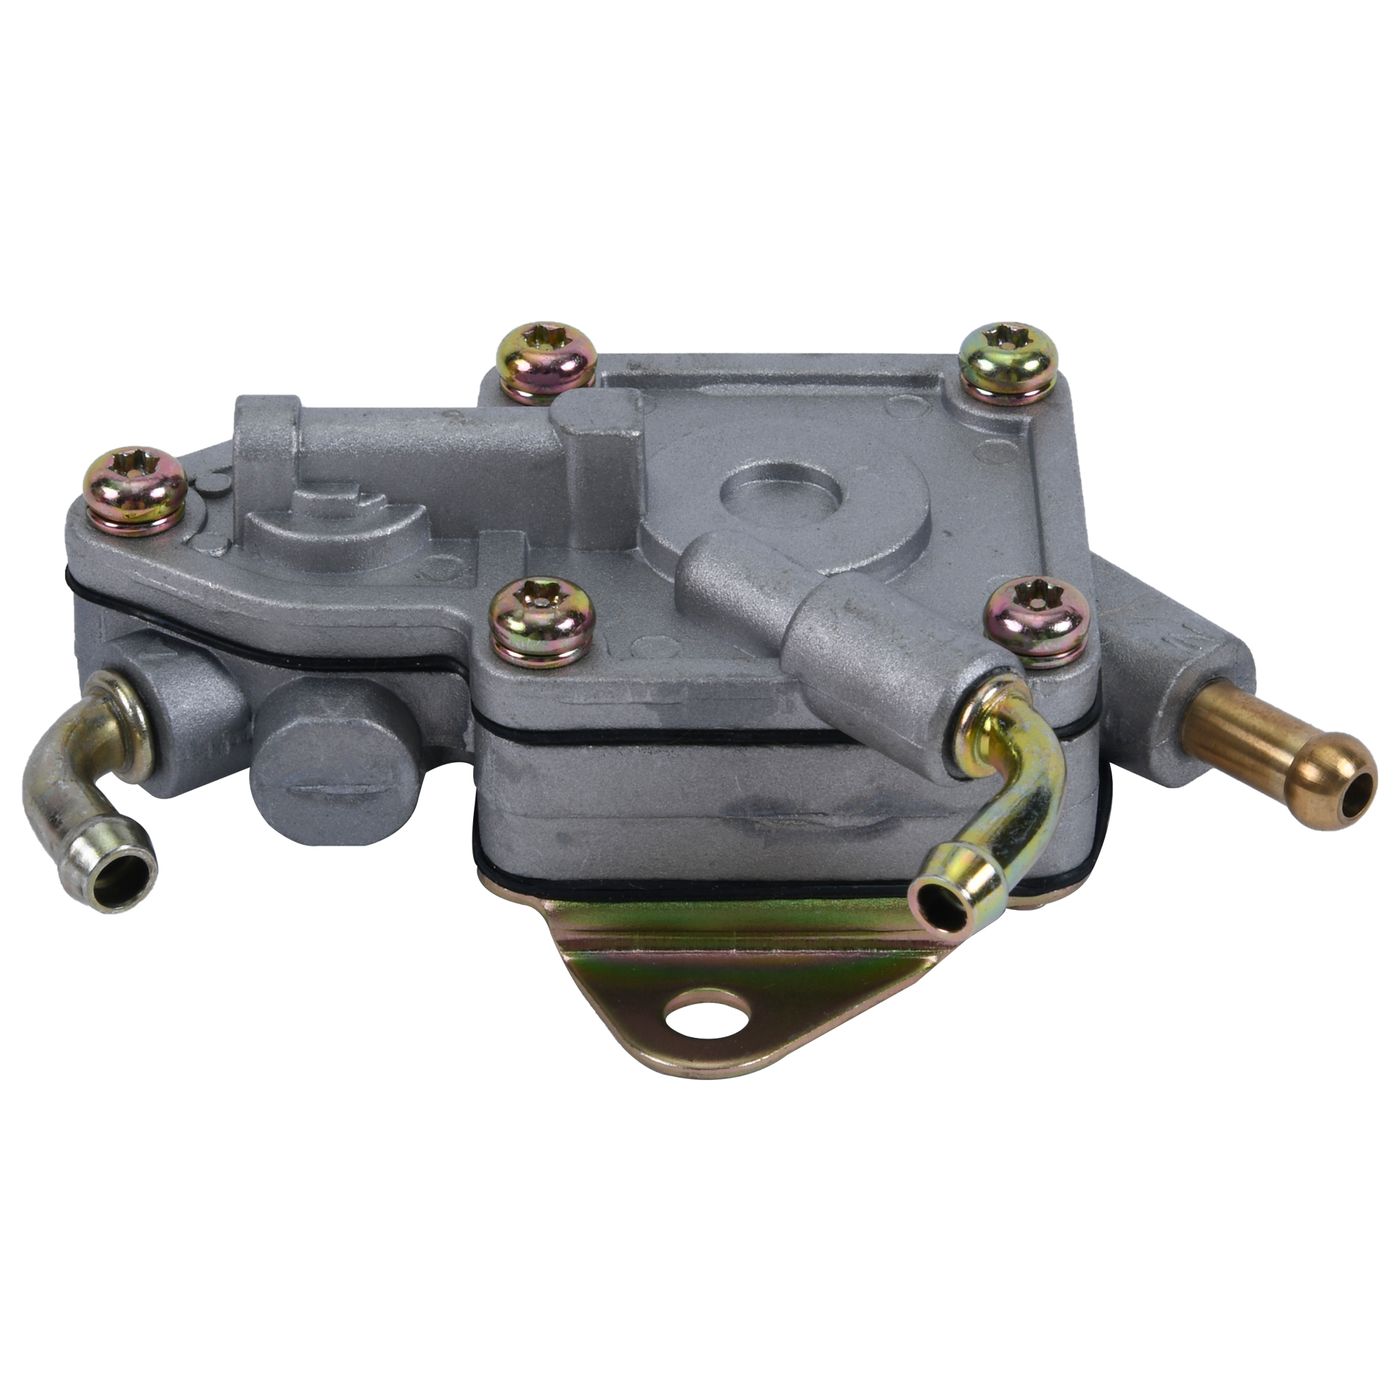 Wrp Fuel Pumps - WRP475001 image